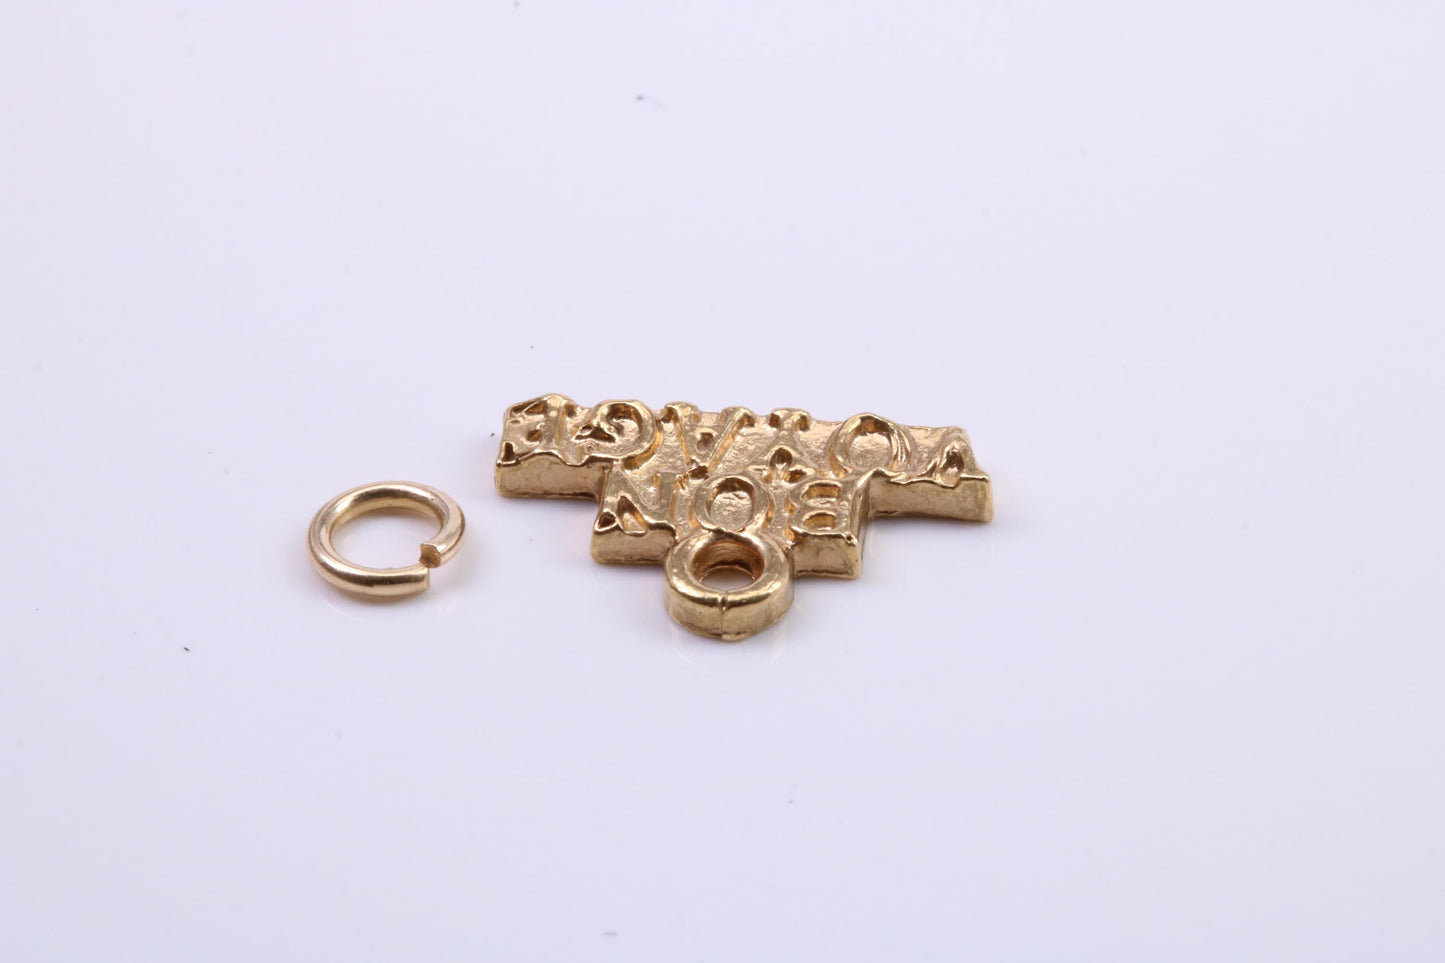 Bon Voyage Charm, Traditional Charm, Made from Solid 9ct Yellow Gold, British Hallmarked, Complete with Attachment Link